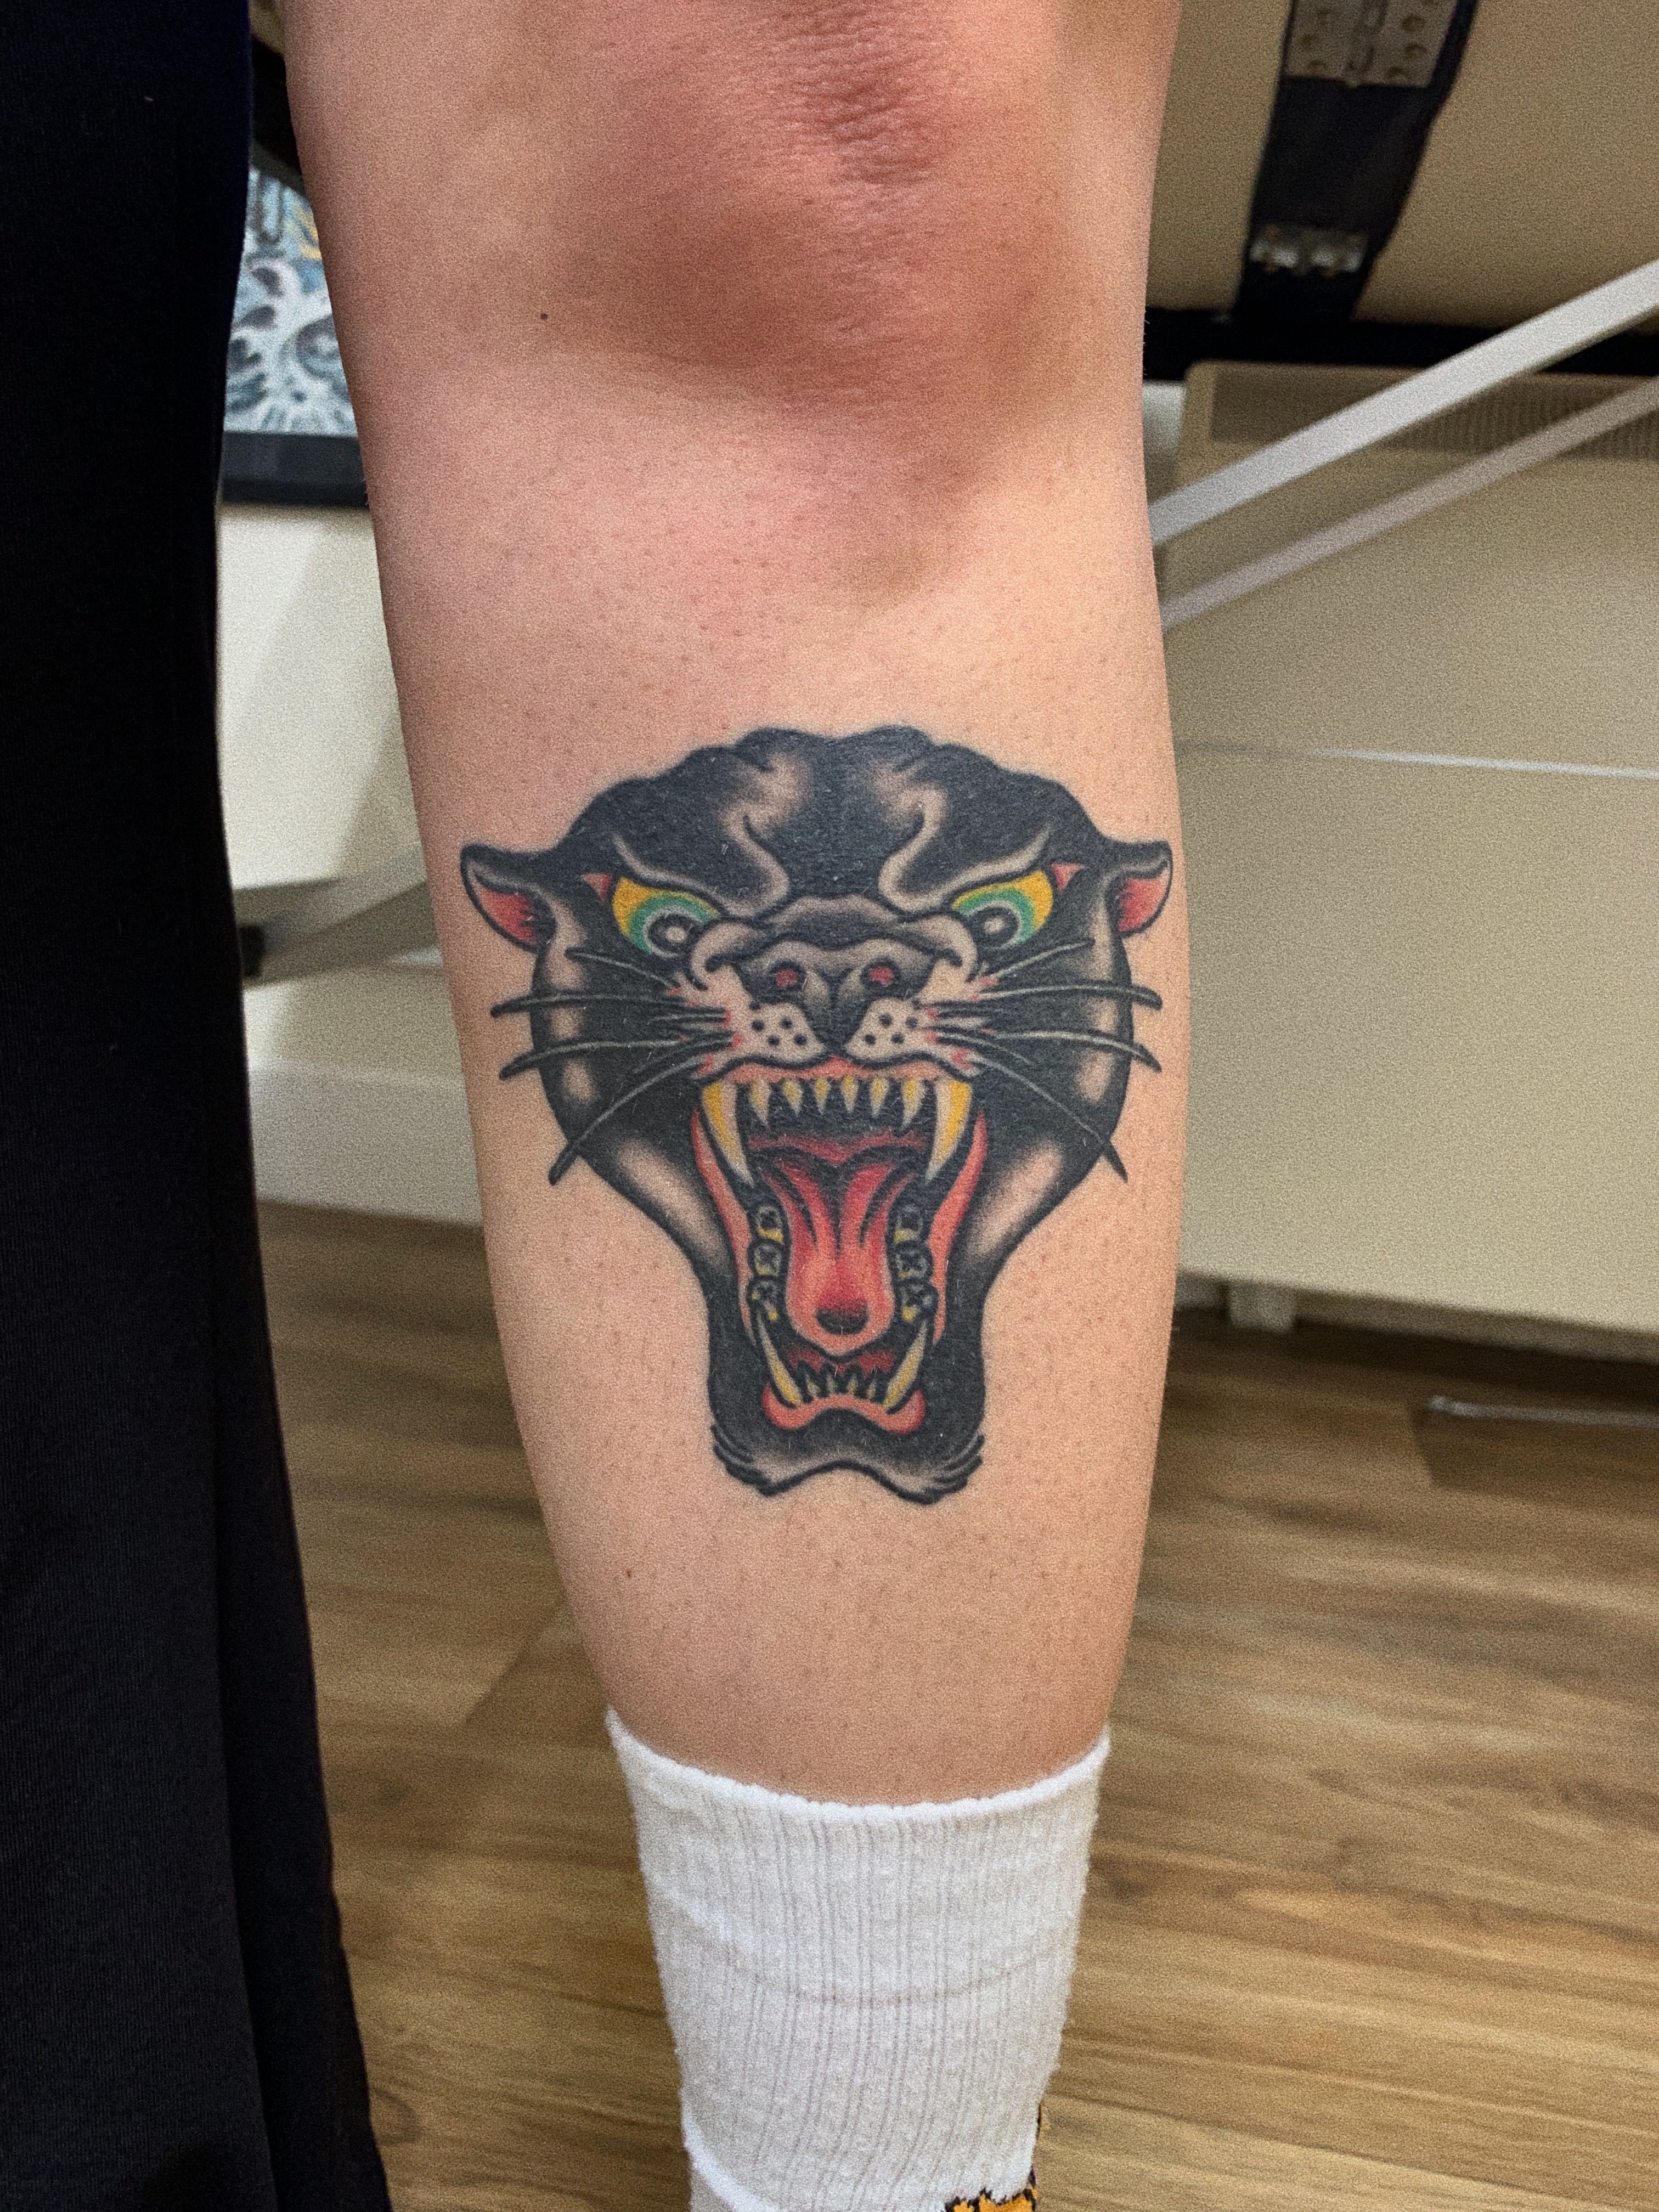 100 Angry Panther Tattoo Designs For Men and Women - All Teens Talk | Panther  tattoo, Tattoo designs men, Tattoo designs